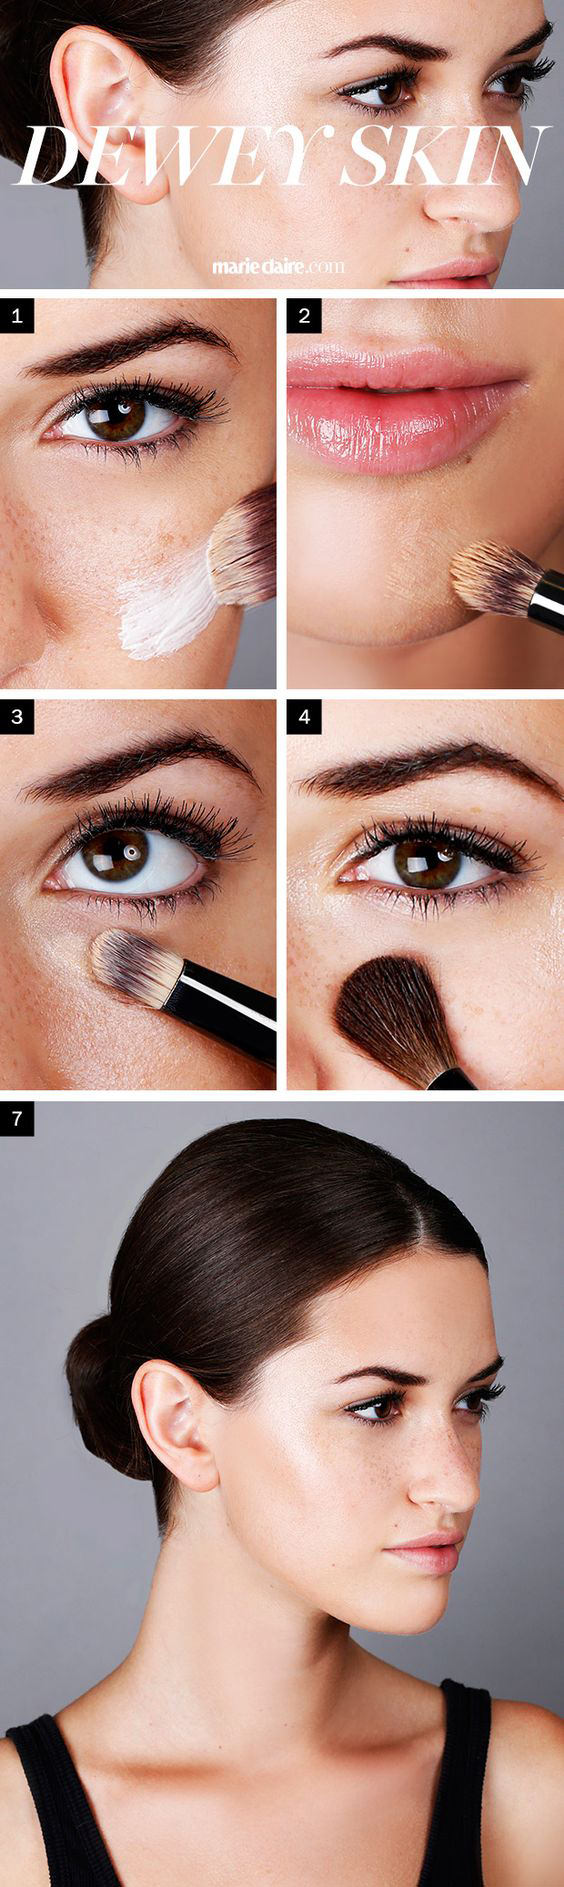 howtolookelesstired1